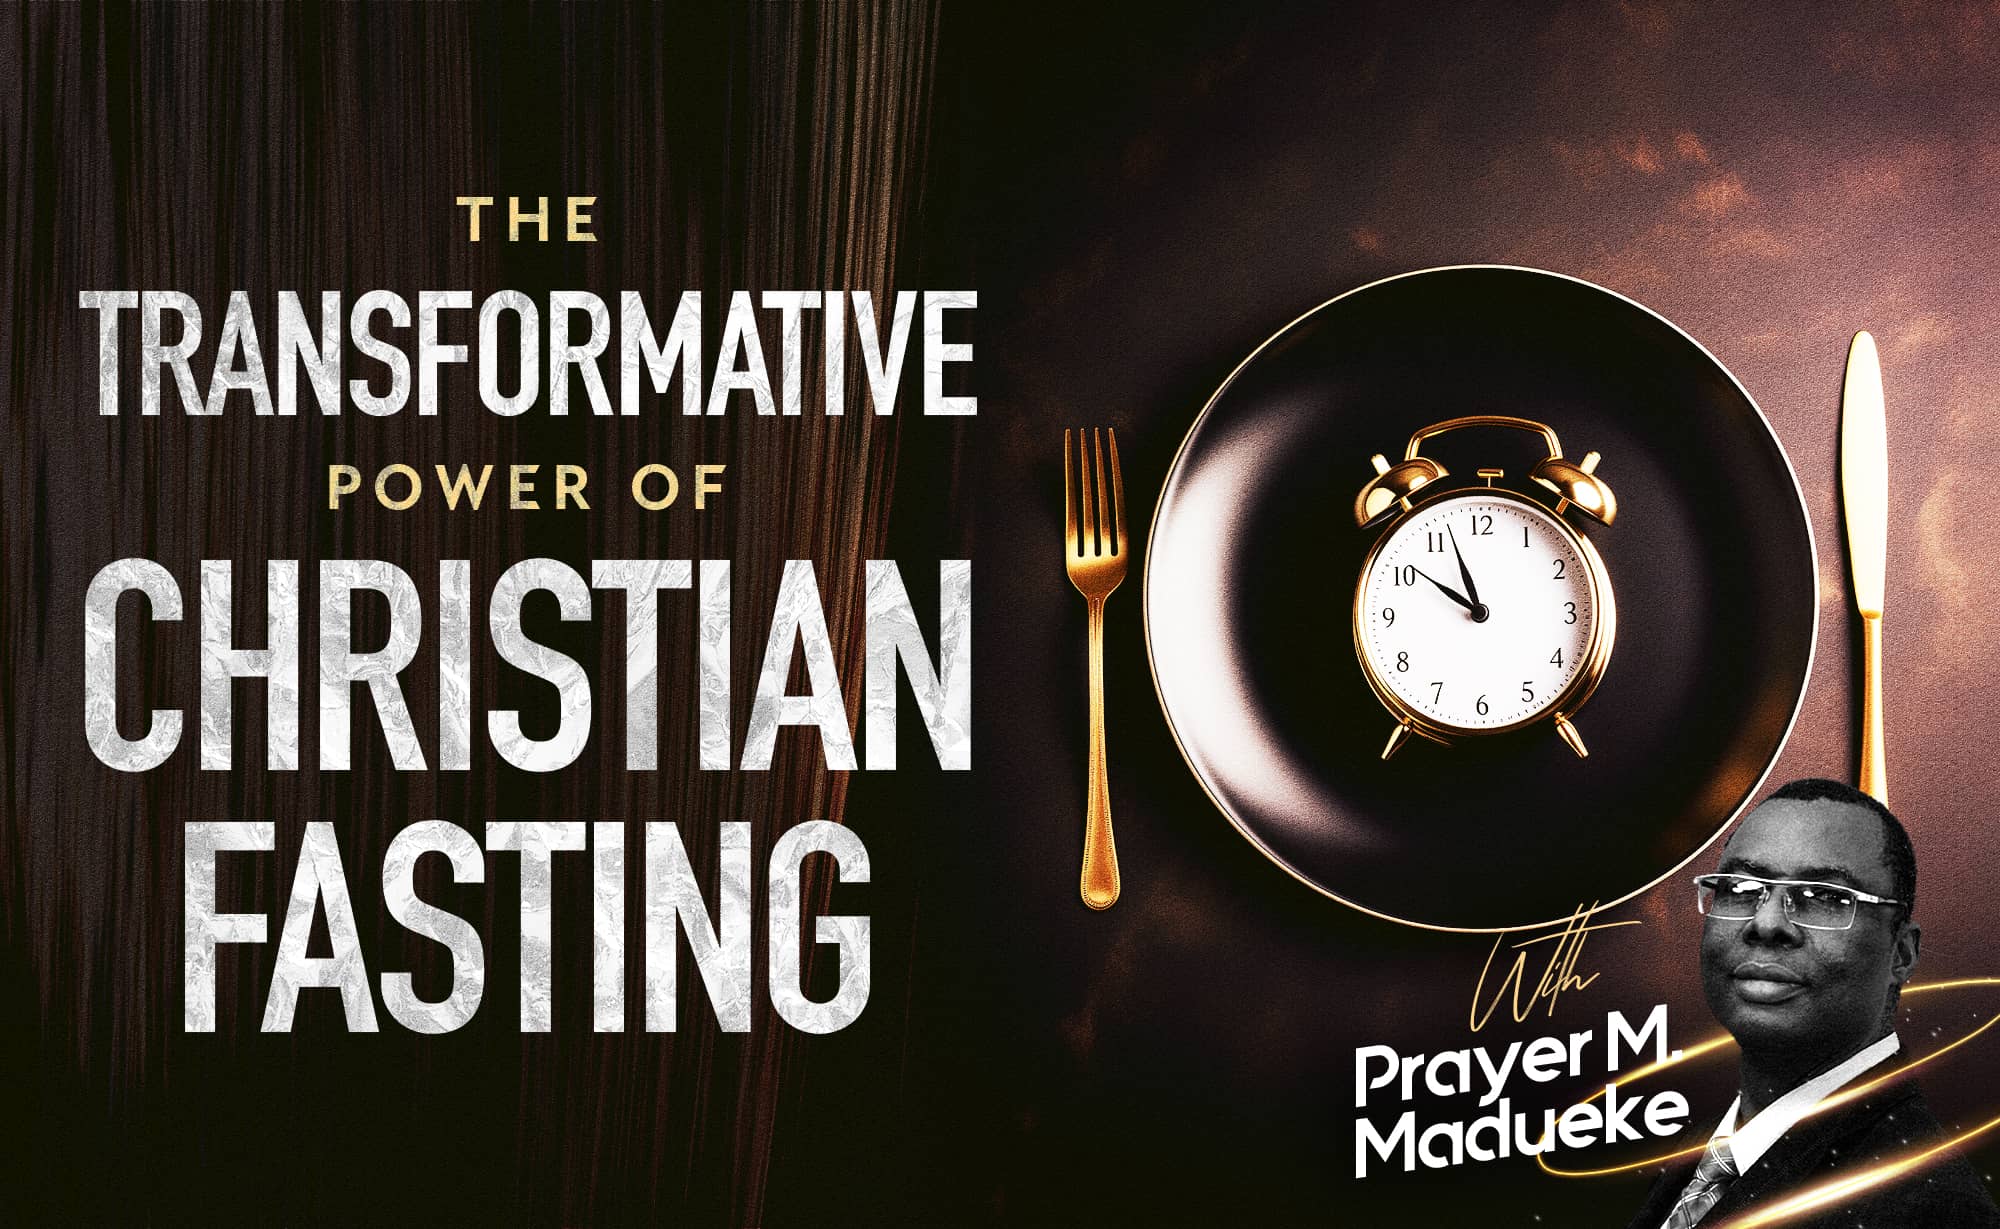 The Transformative Power of Christian Fasting